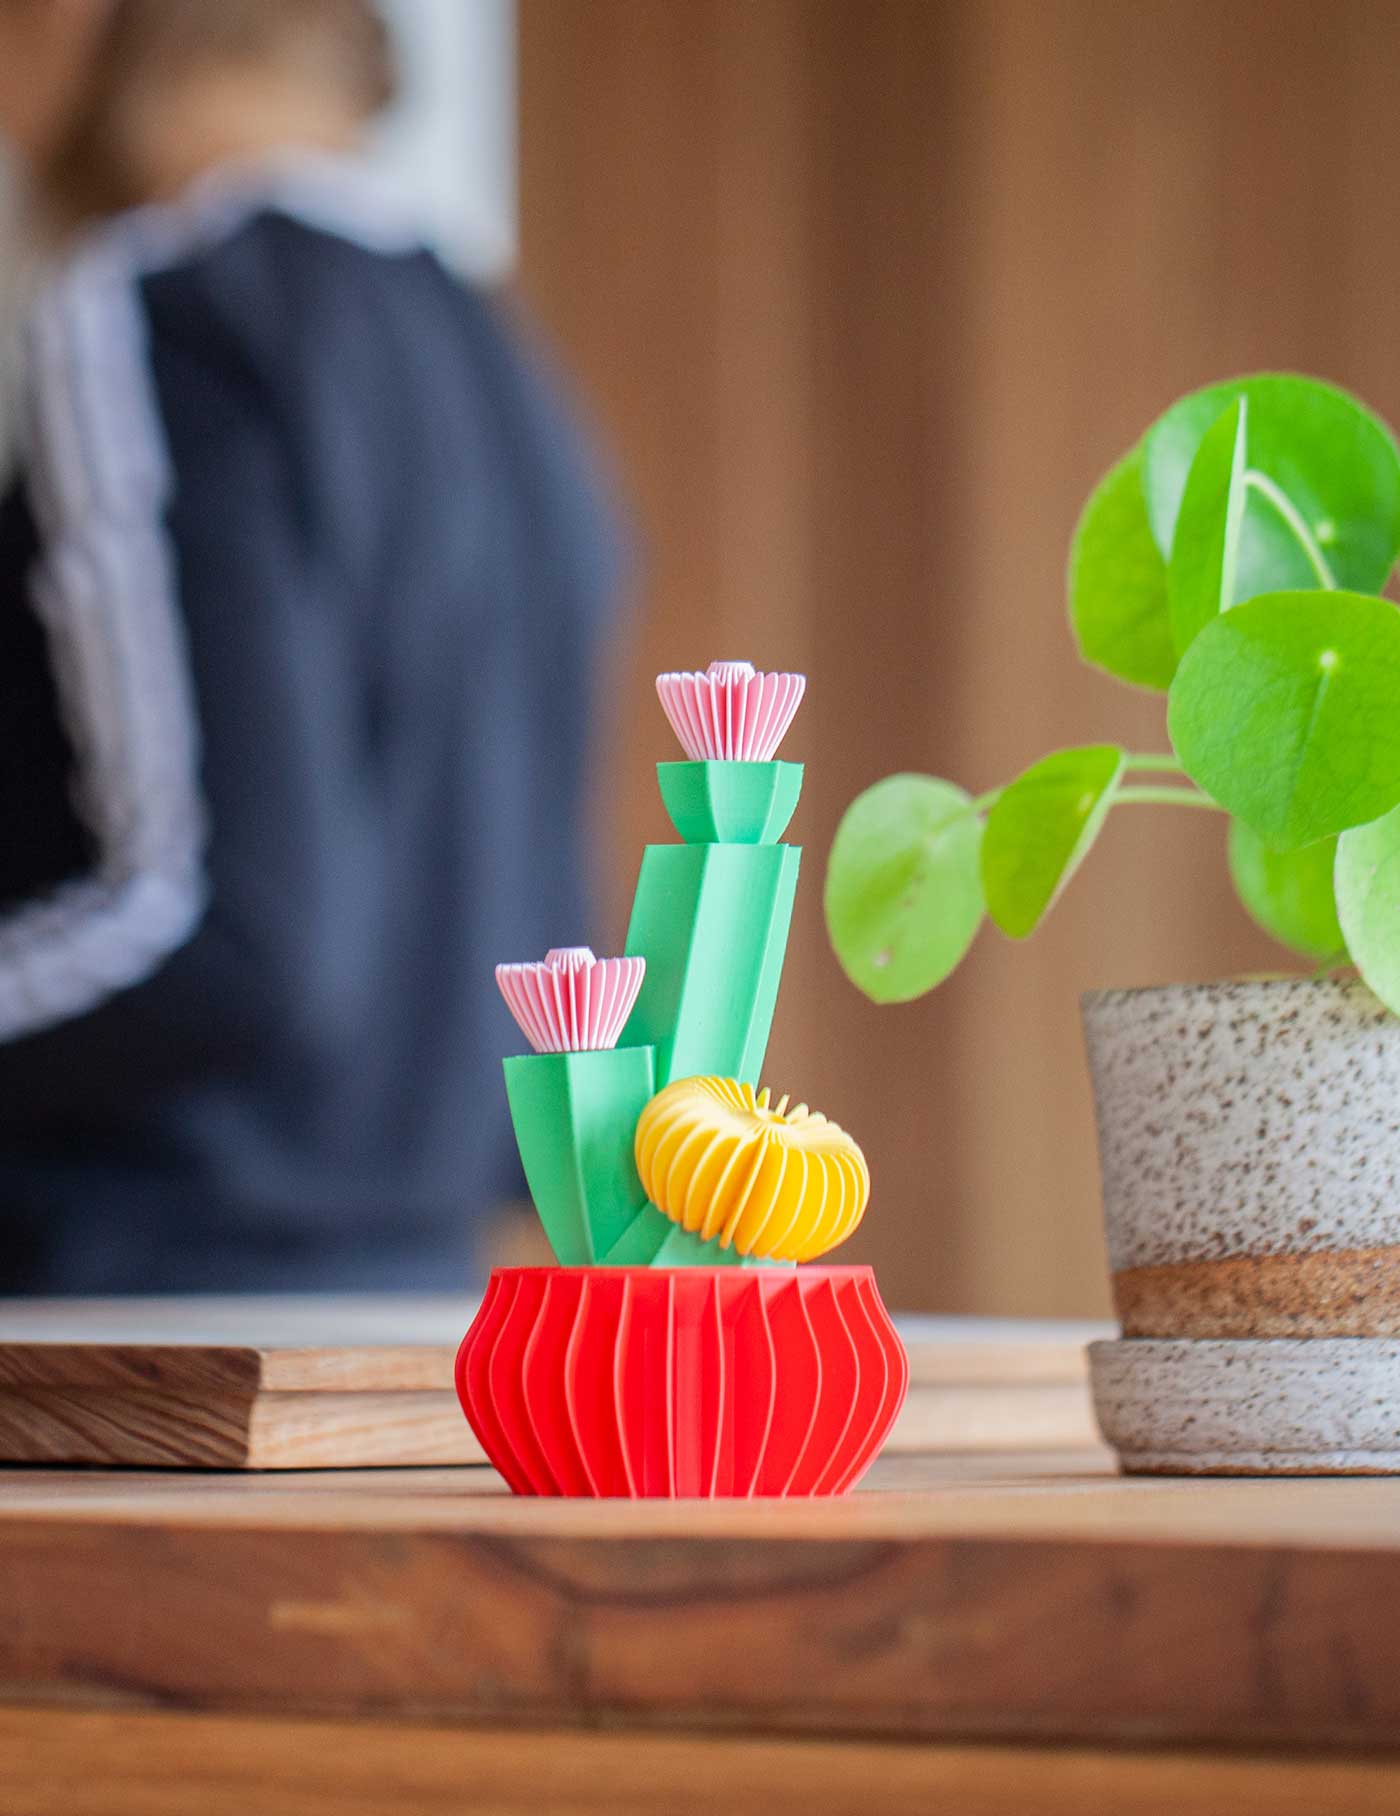 3D printed Cacti designed by Wow Mountain on a timber benchtop.